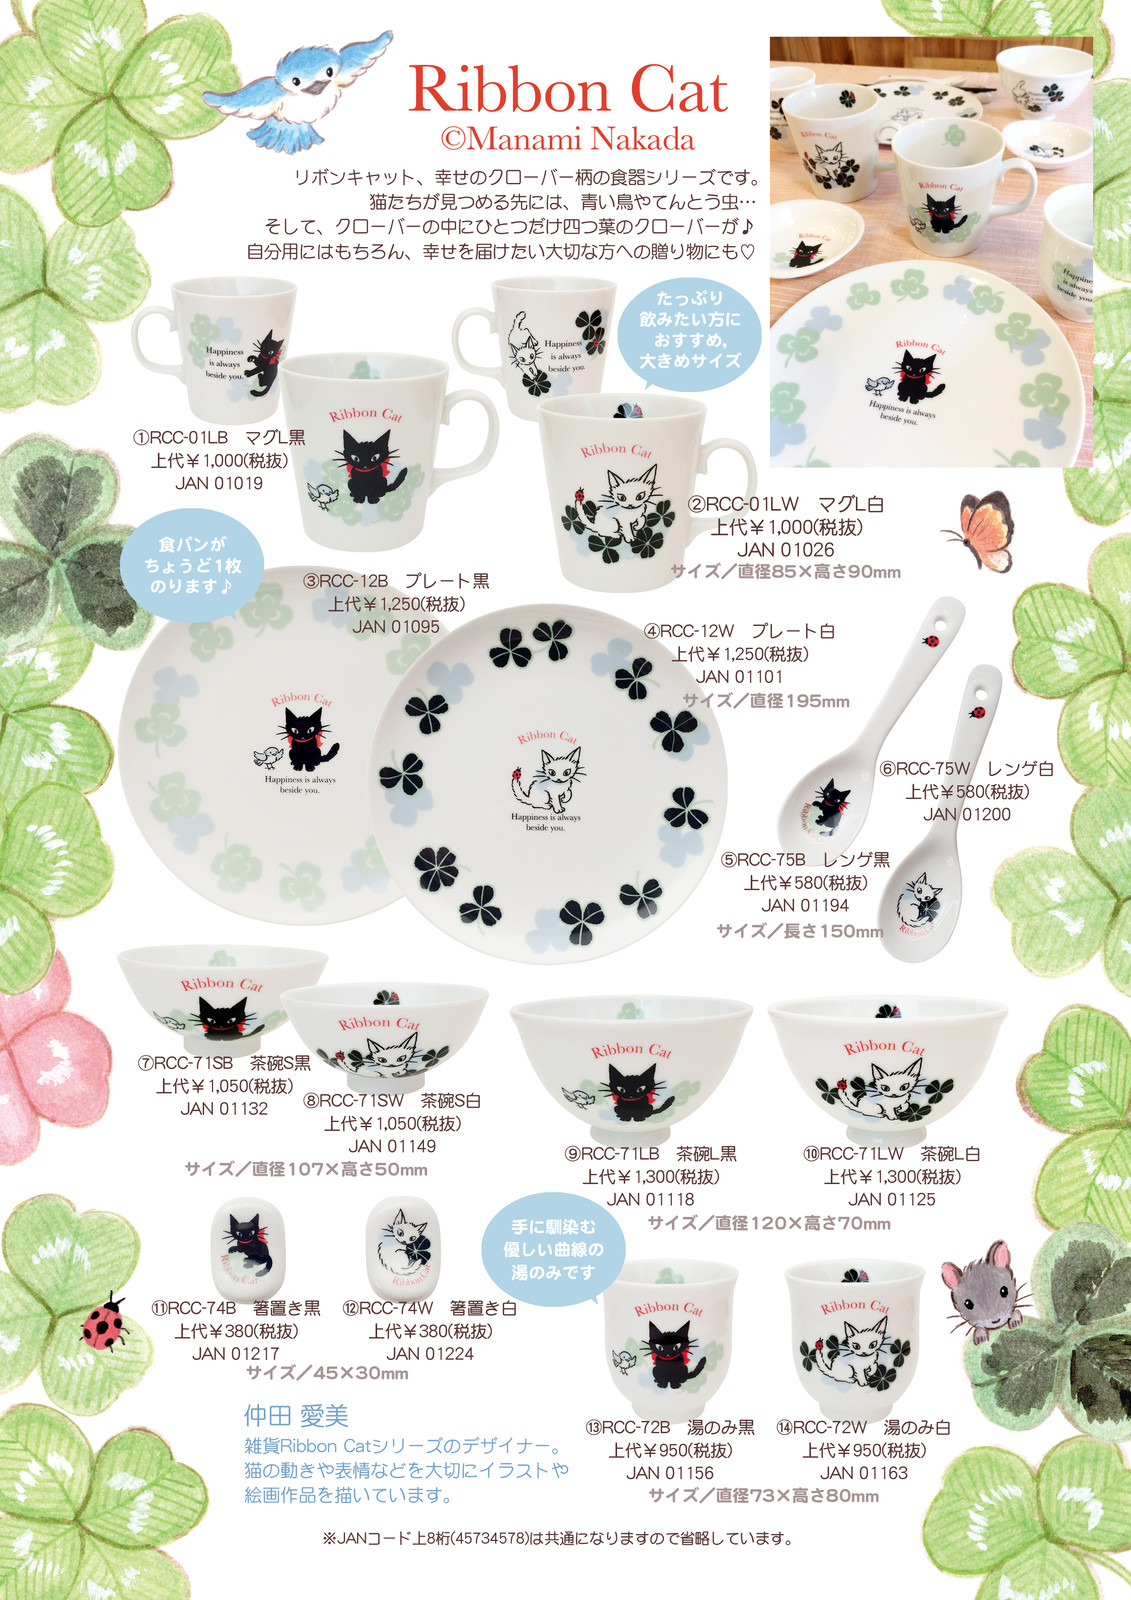 Clover Plate Ribbon Cat Import Japanese Products At Wholesale Prices Super Delivery